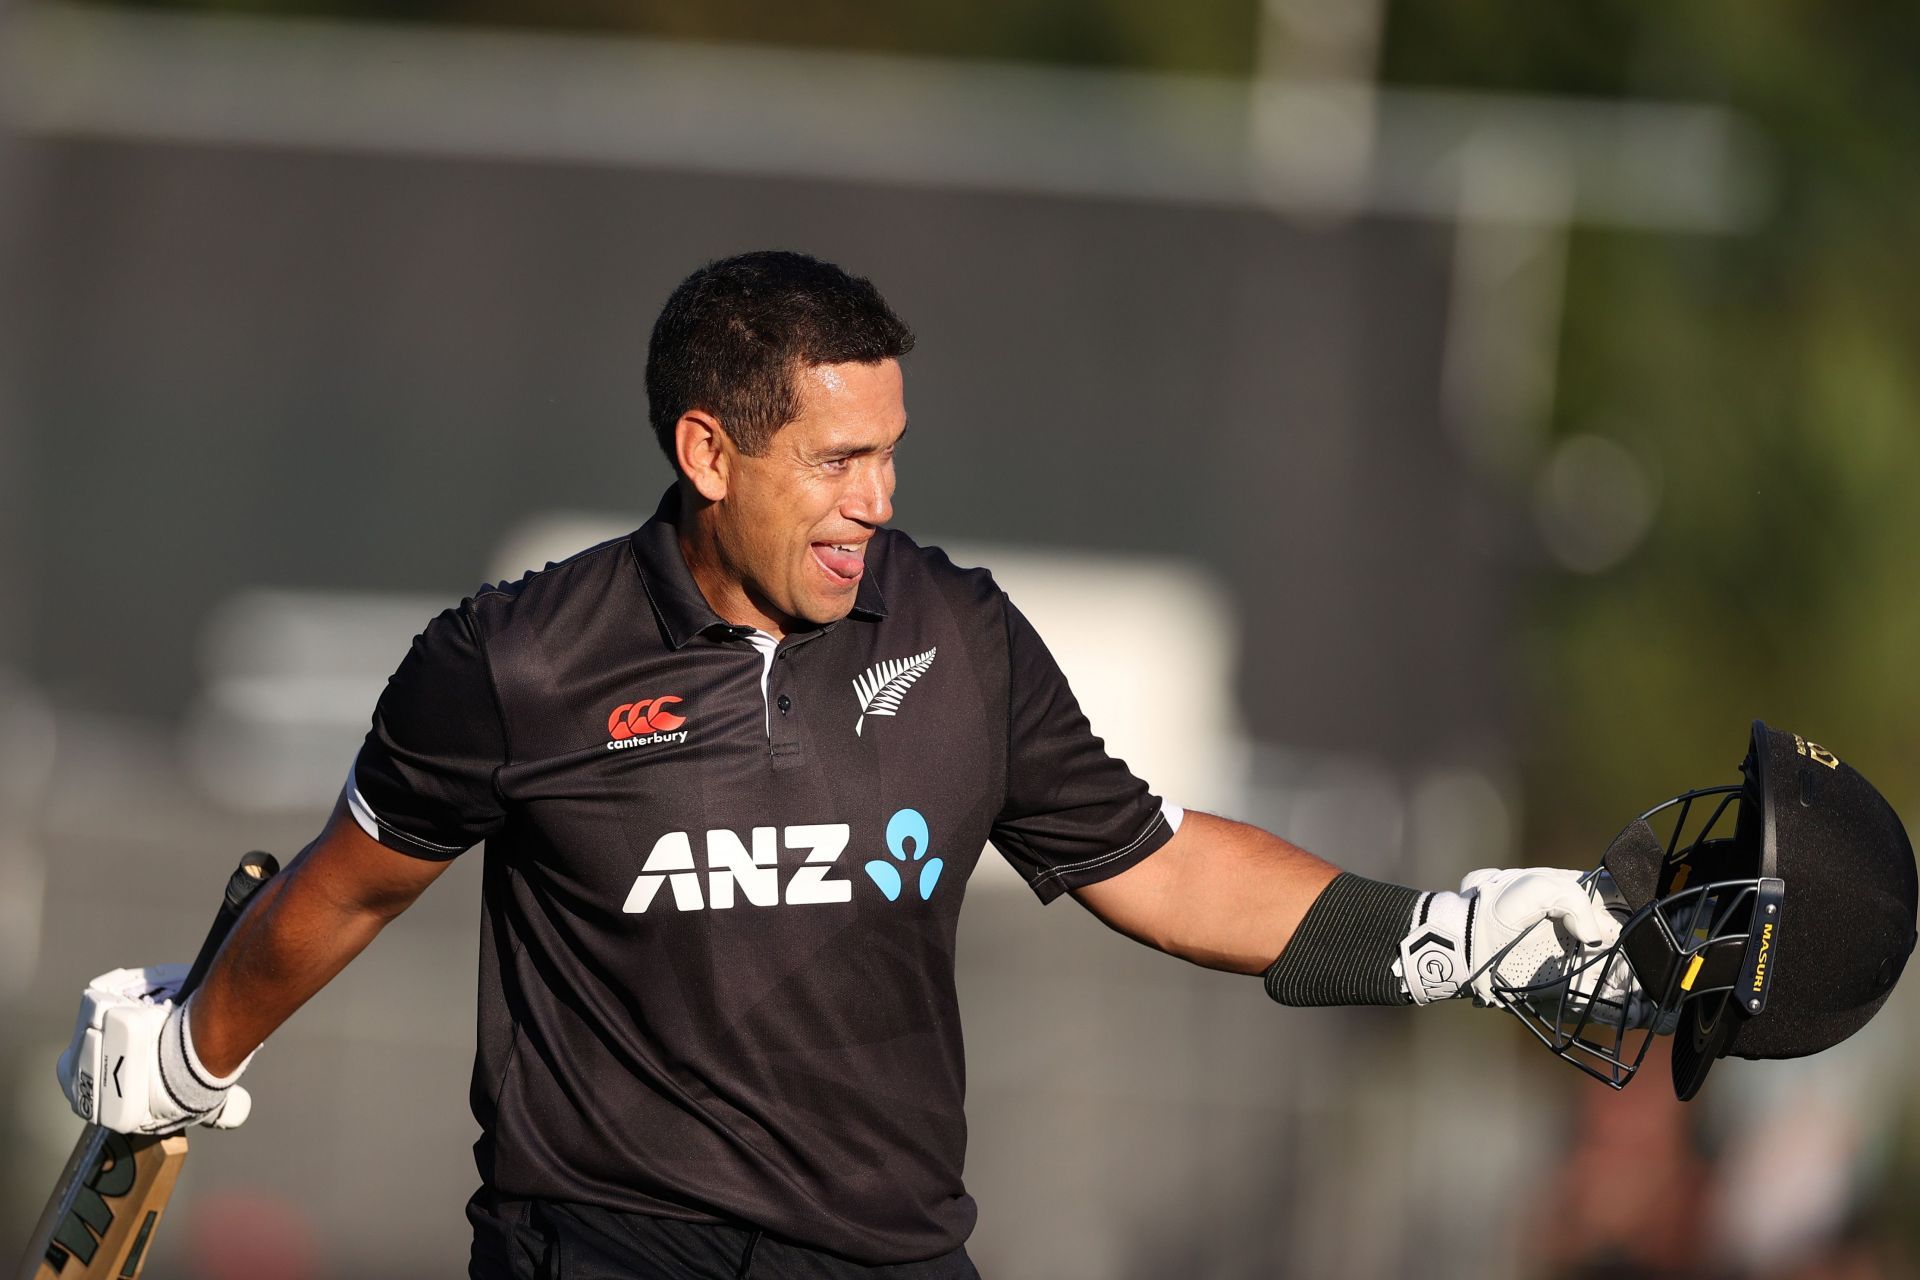 Ross Taylor retired from international cricket in 2022